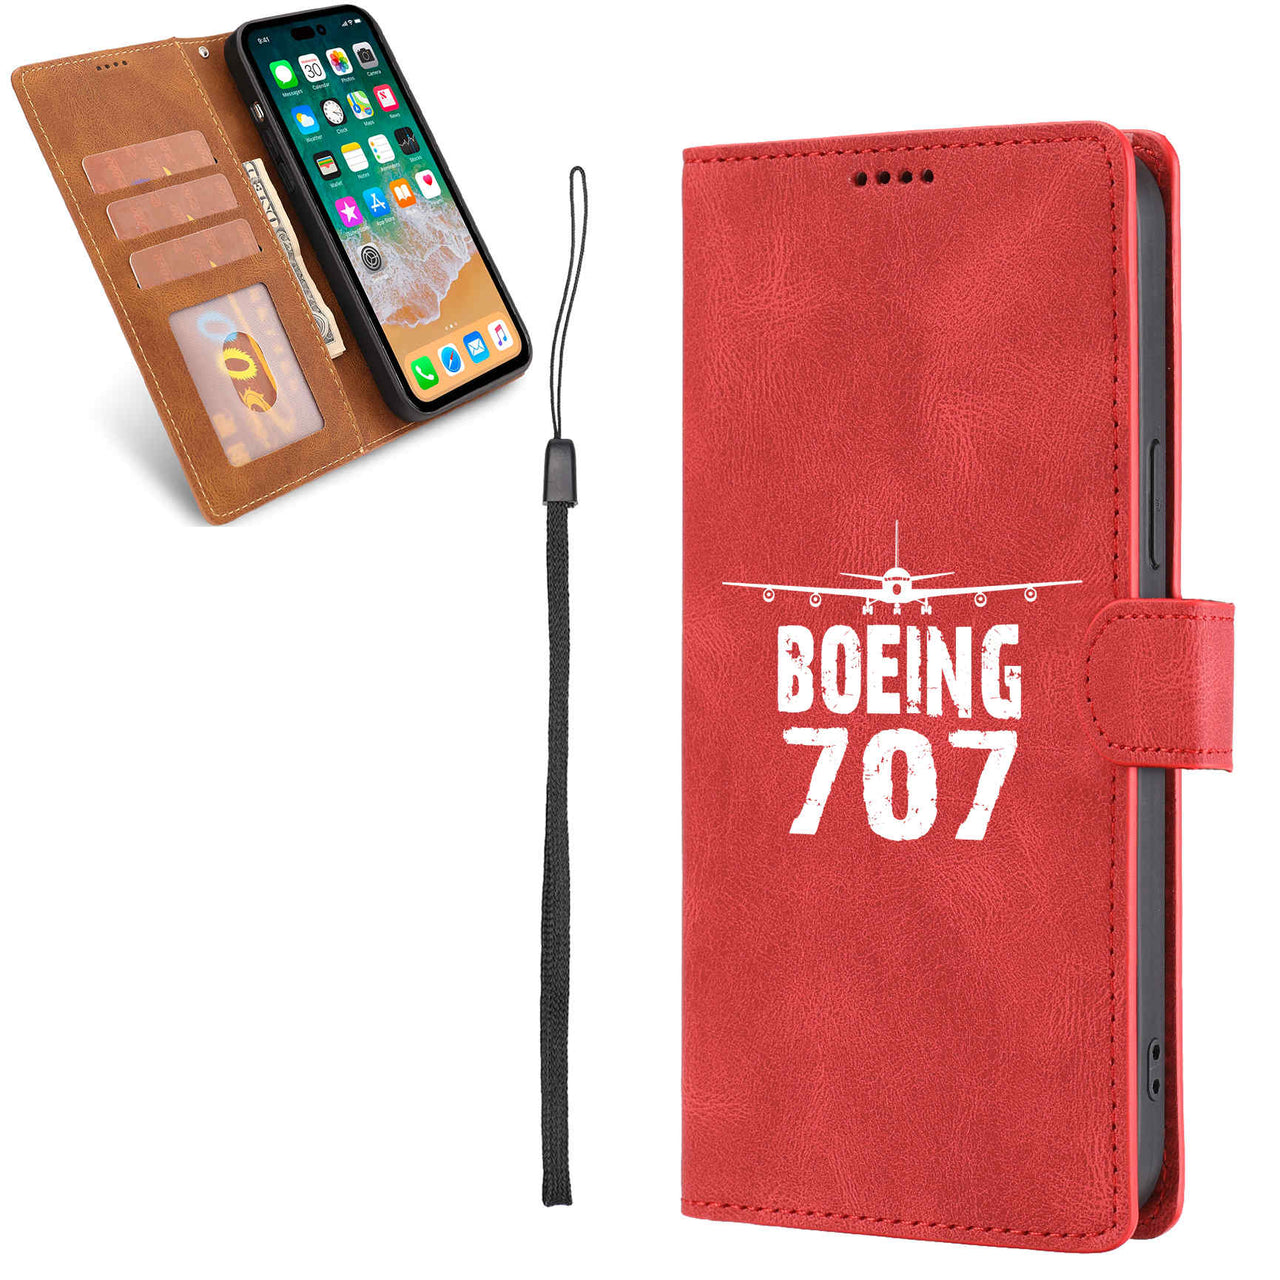 Boeing 707 & Plane Designed Leather Samsung S & Note Cases